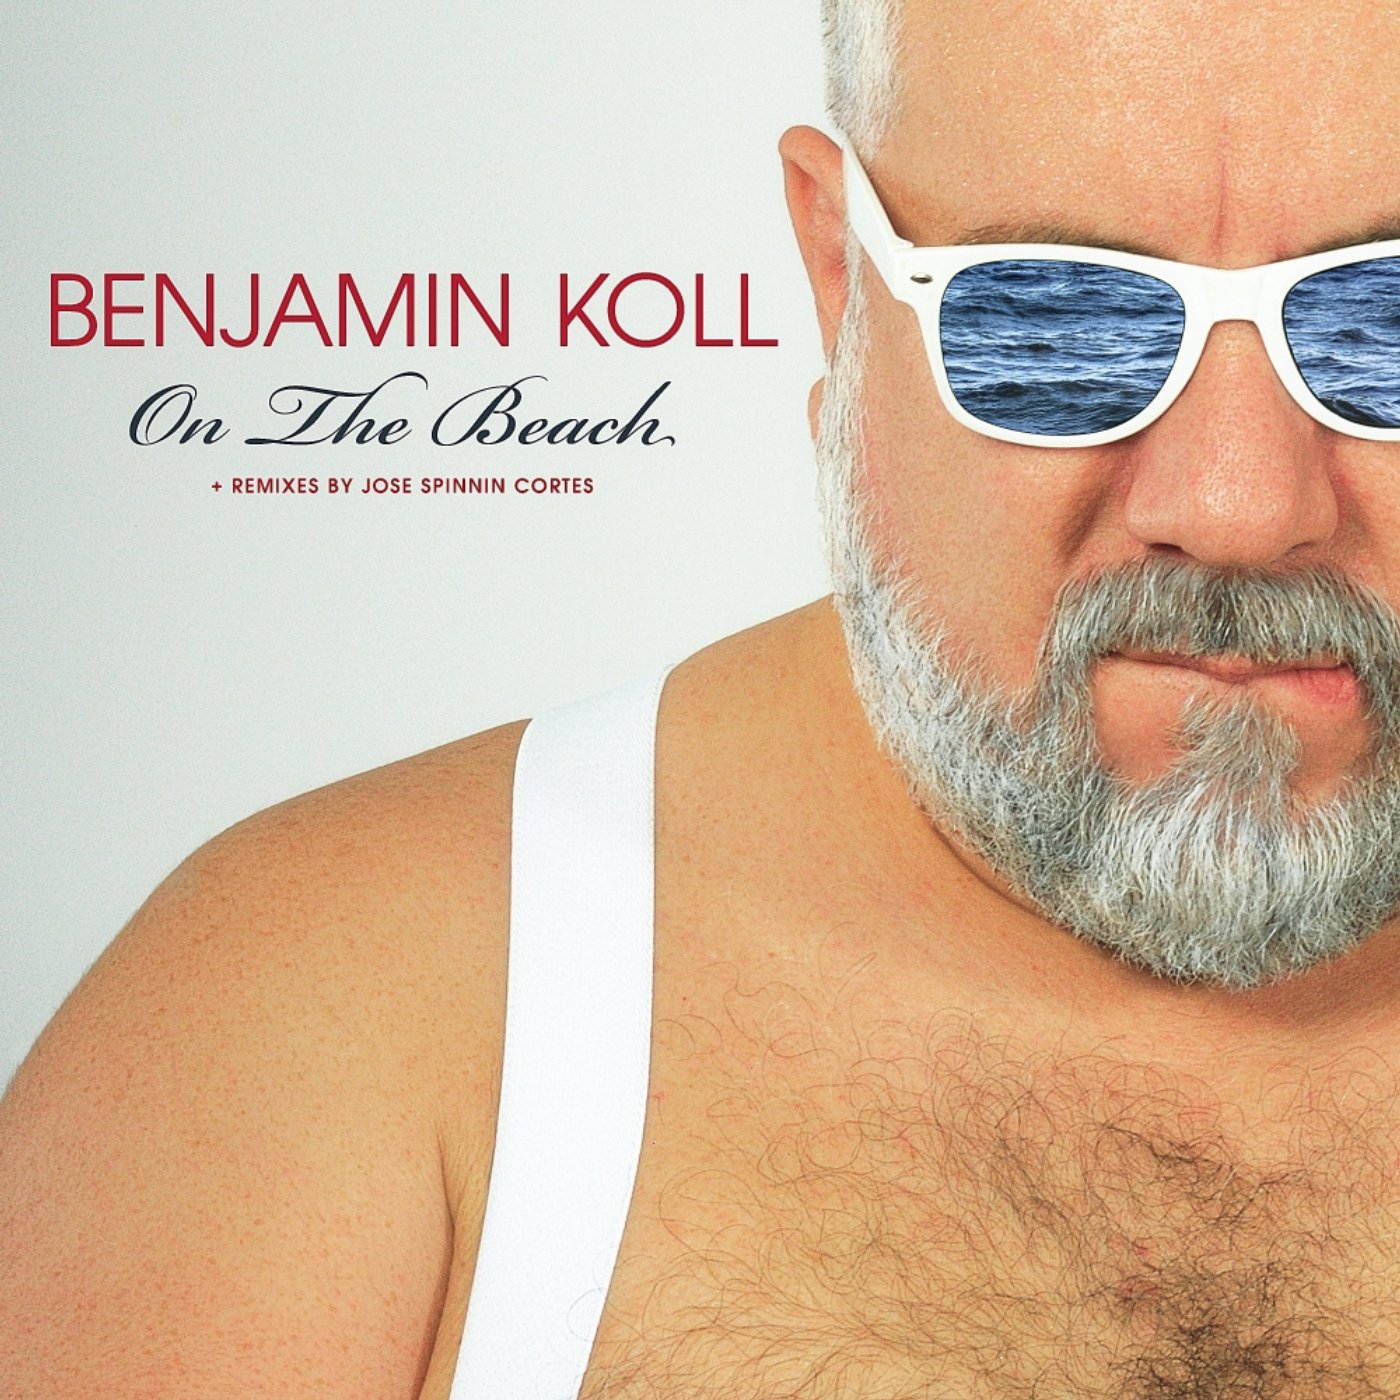 Art for On The Beach (Jose Spinnin Cortes Subwoofer Remix) by Benjamin Koll